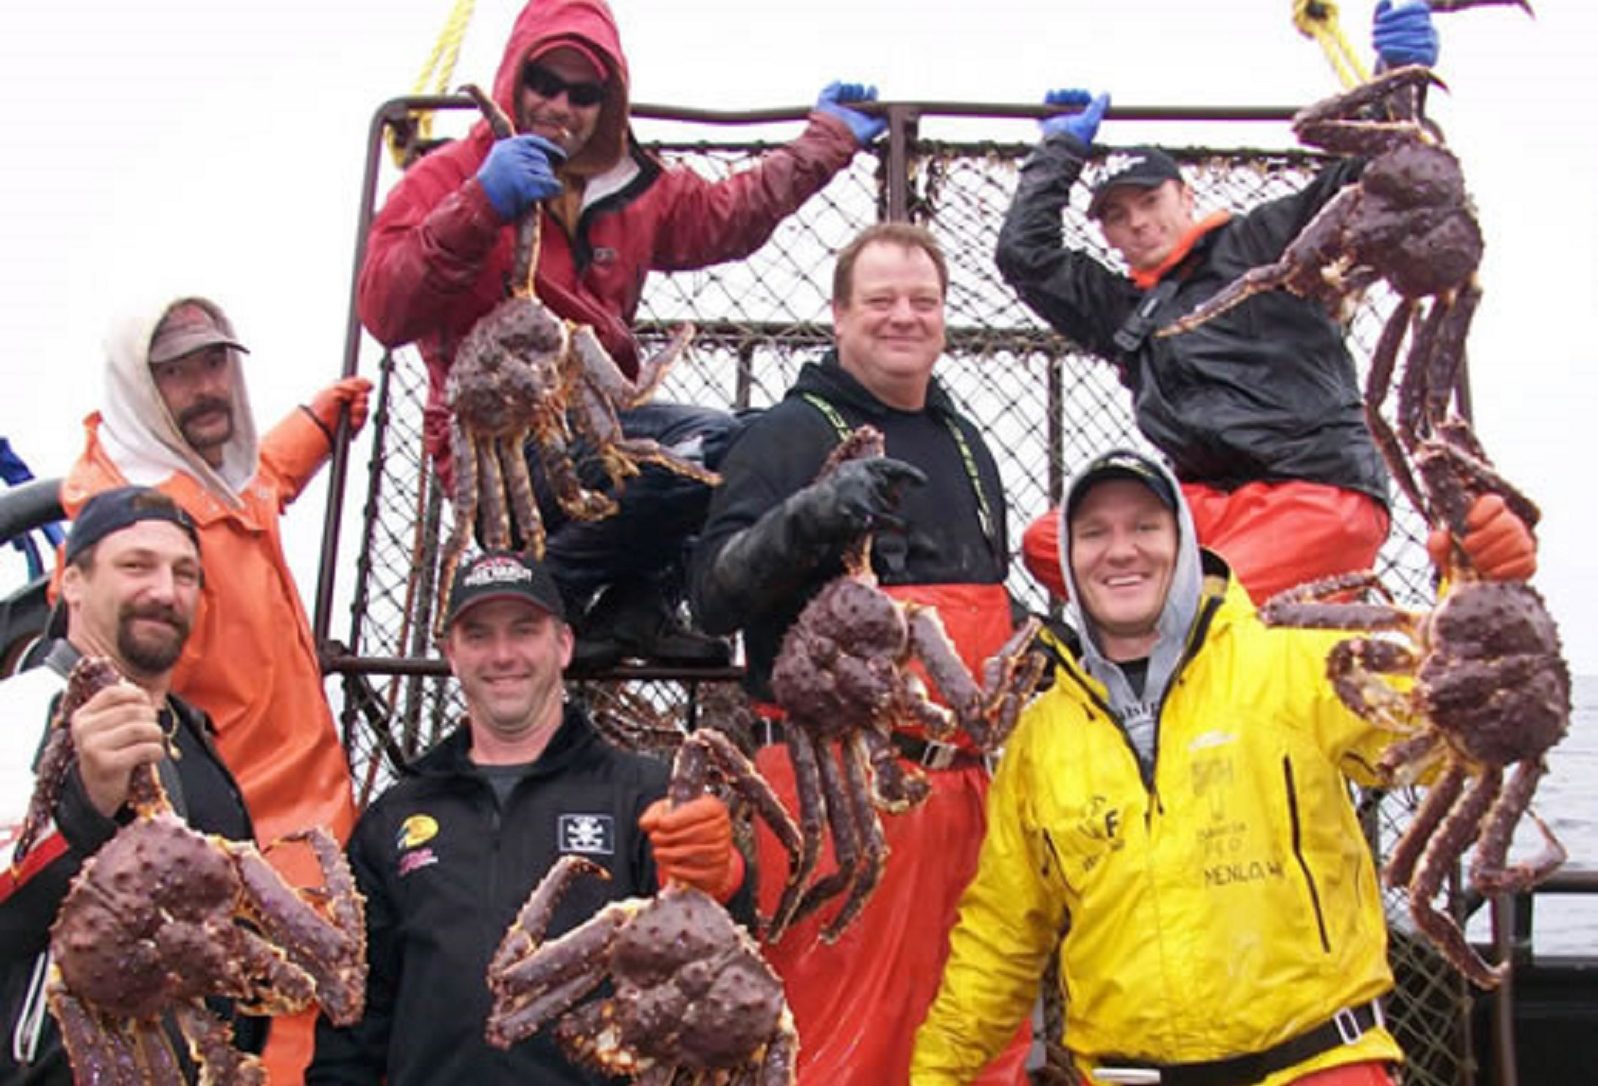 The Unlikely Celebrity: Mike Fourtner and the Deadliest Catch - LewisTalkWA